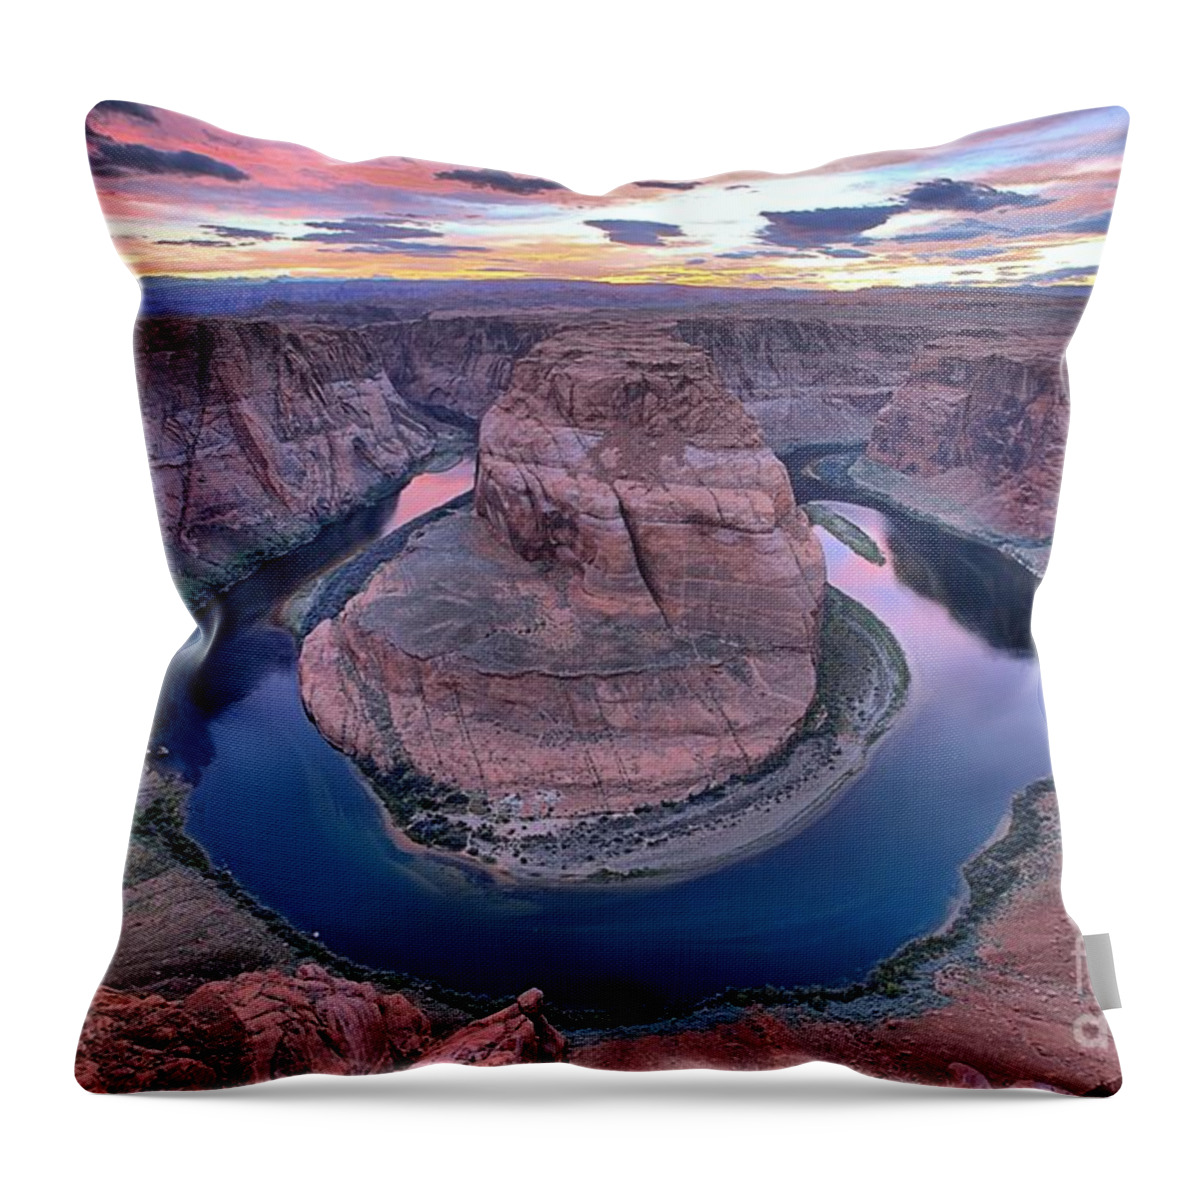 Horseshoe Bend Throw Pillow featuring the photograph Horseshoe Bend Pastels by Adam Jewell